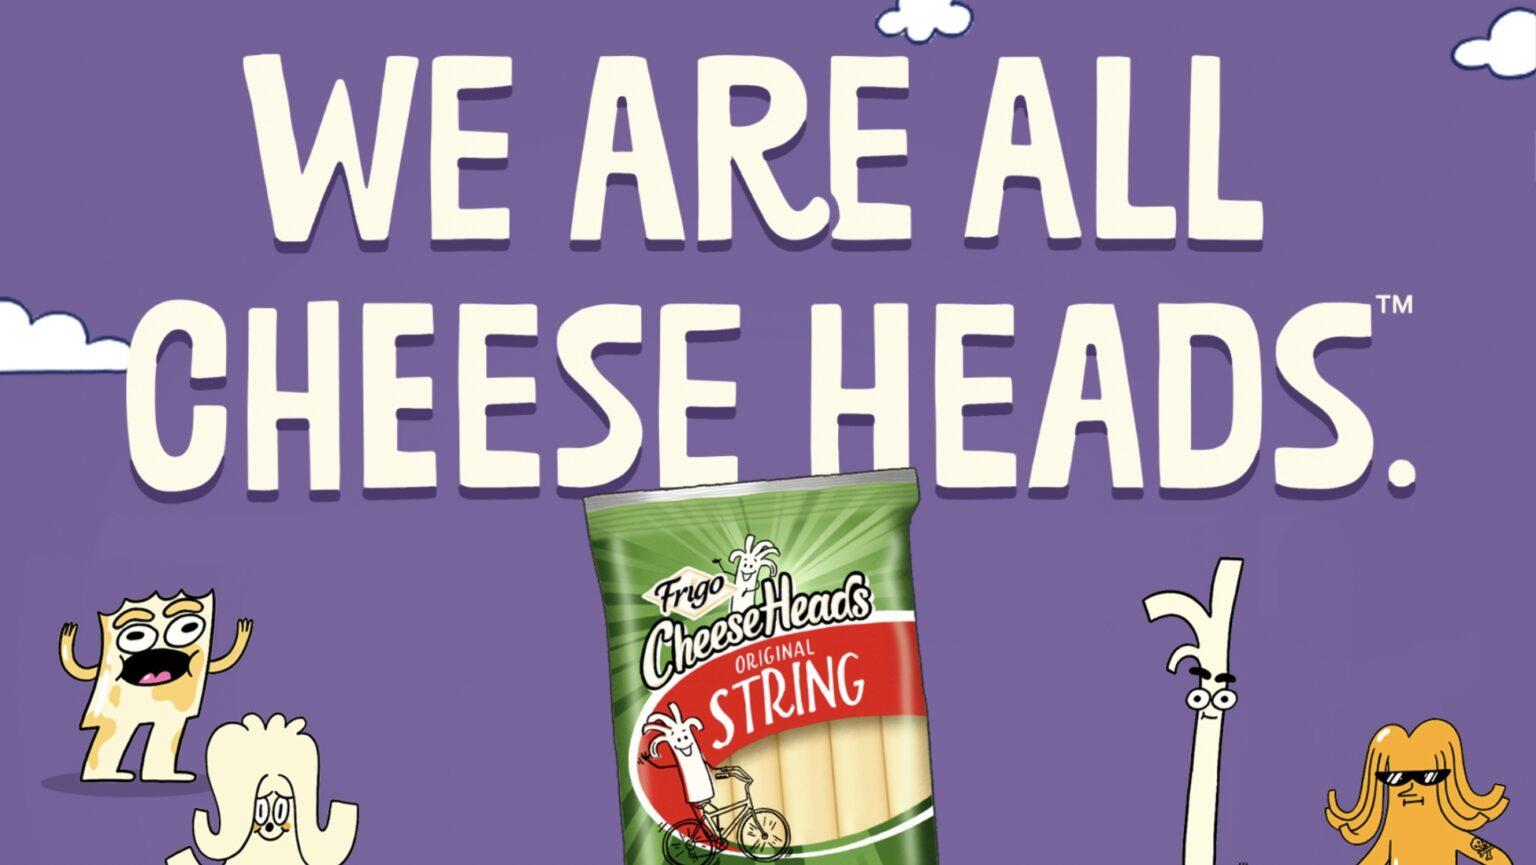 We Are All Cheese Heads